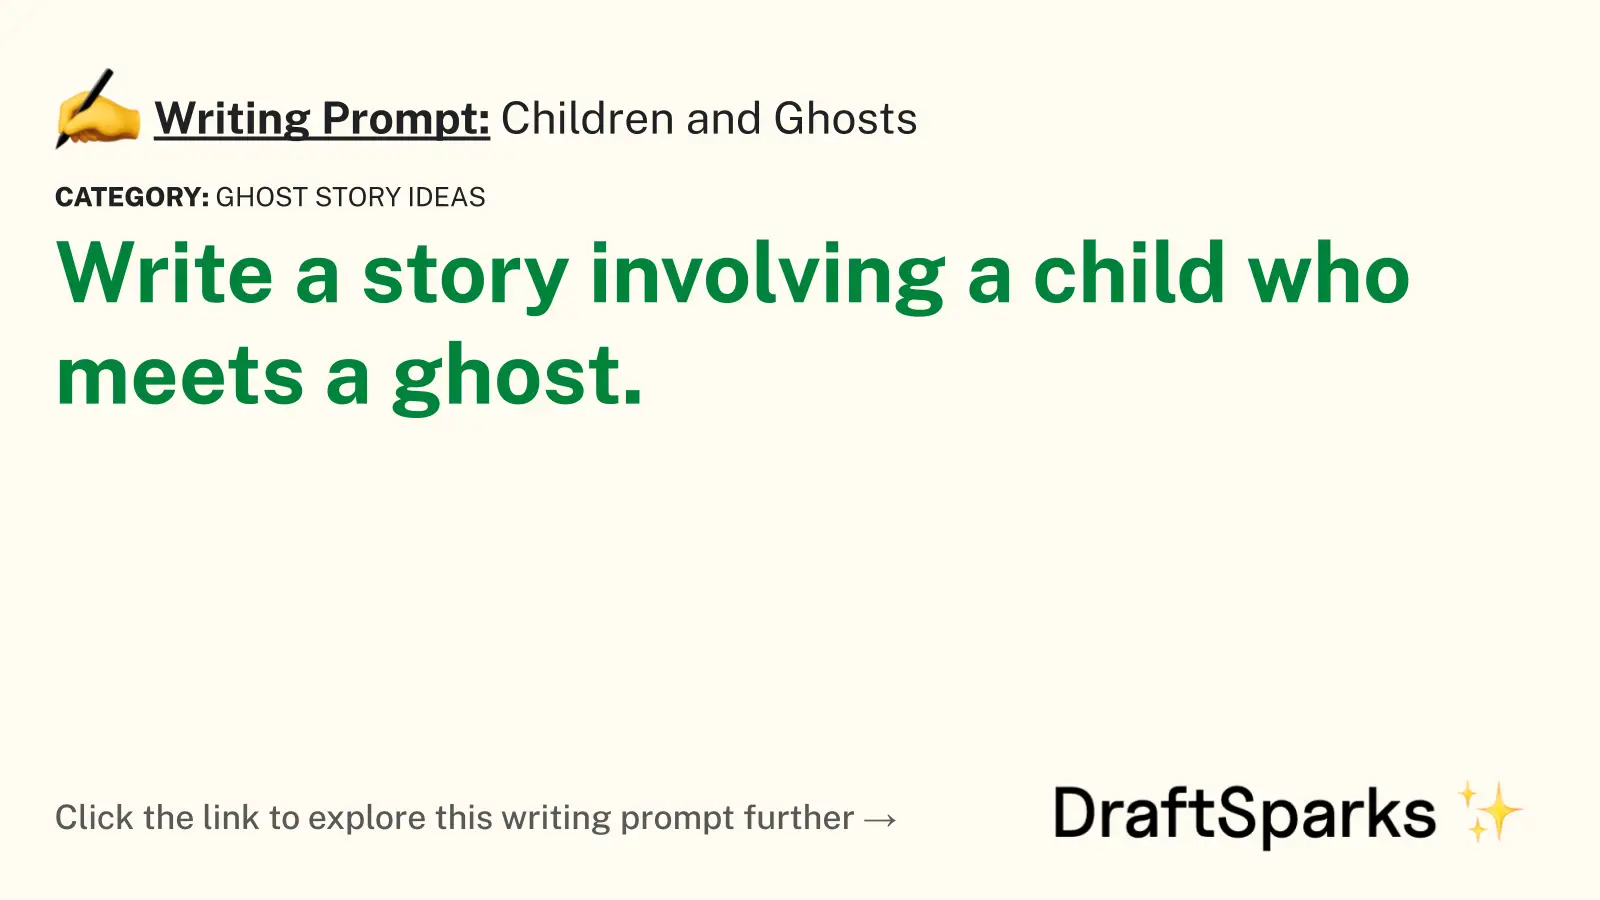 Children and Ghosts